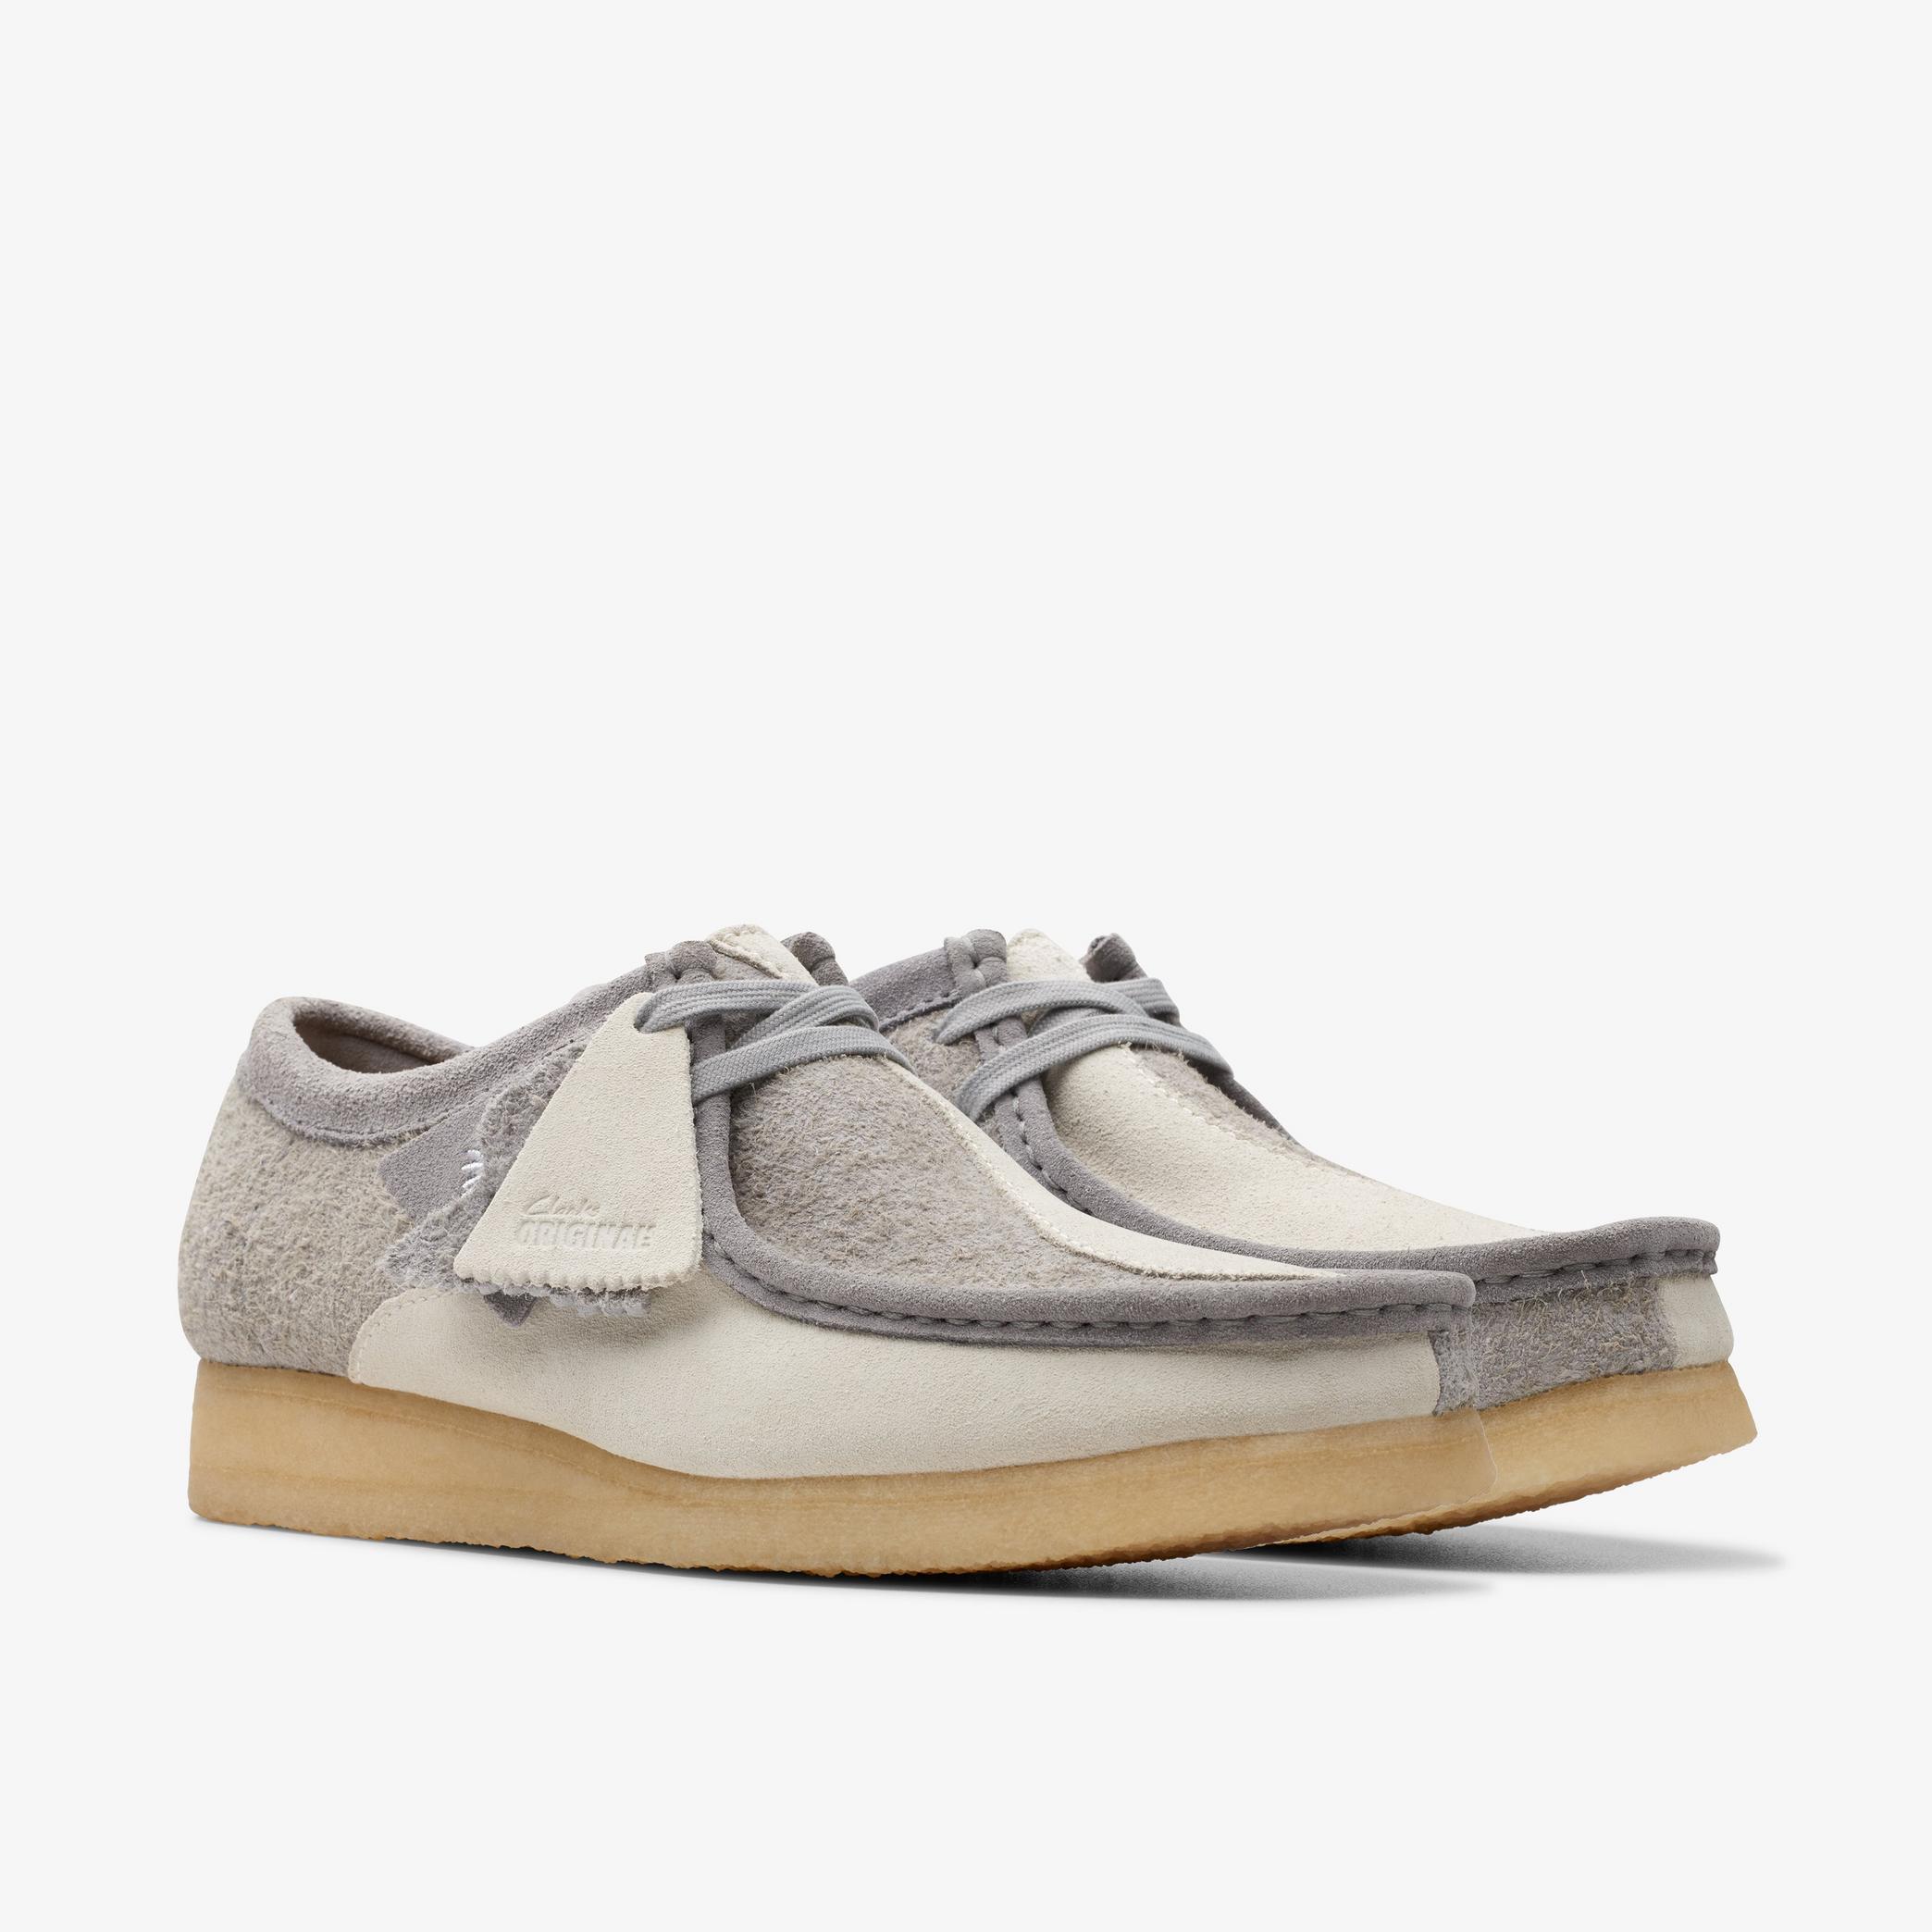 Wallabee Grey/Off White Wallabee, view 4 of 7